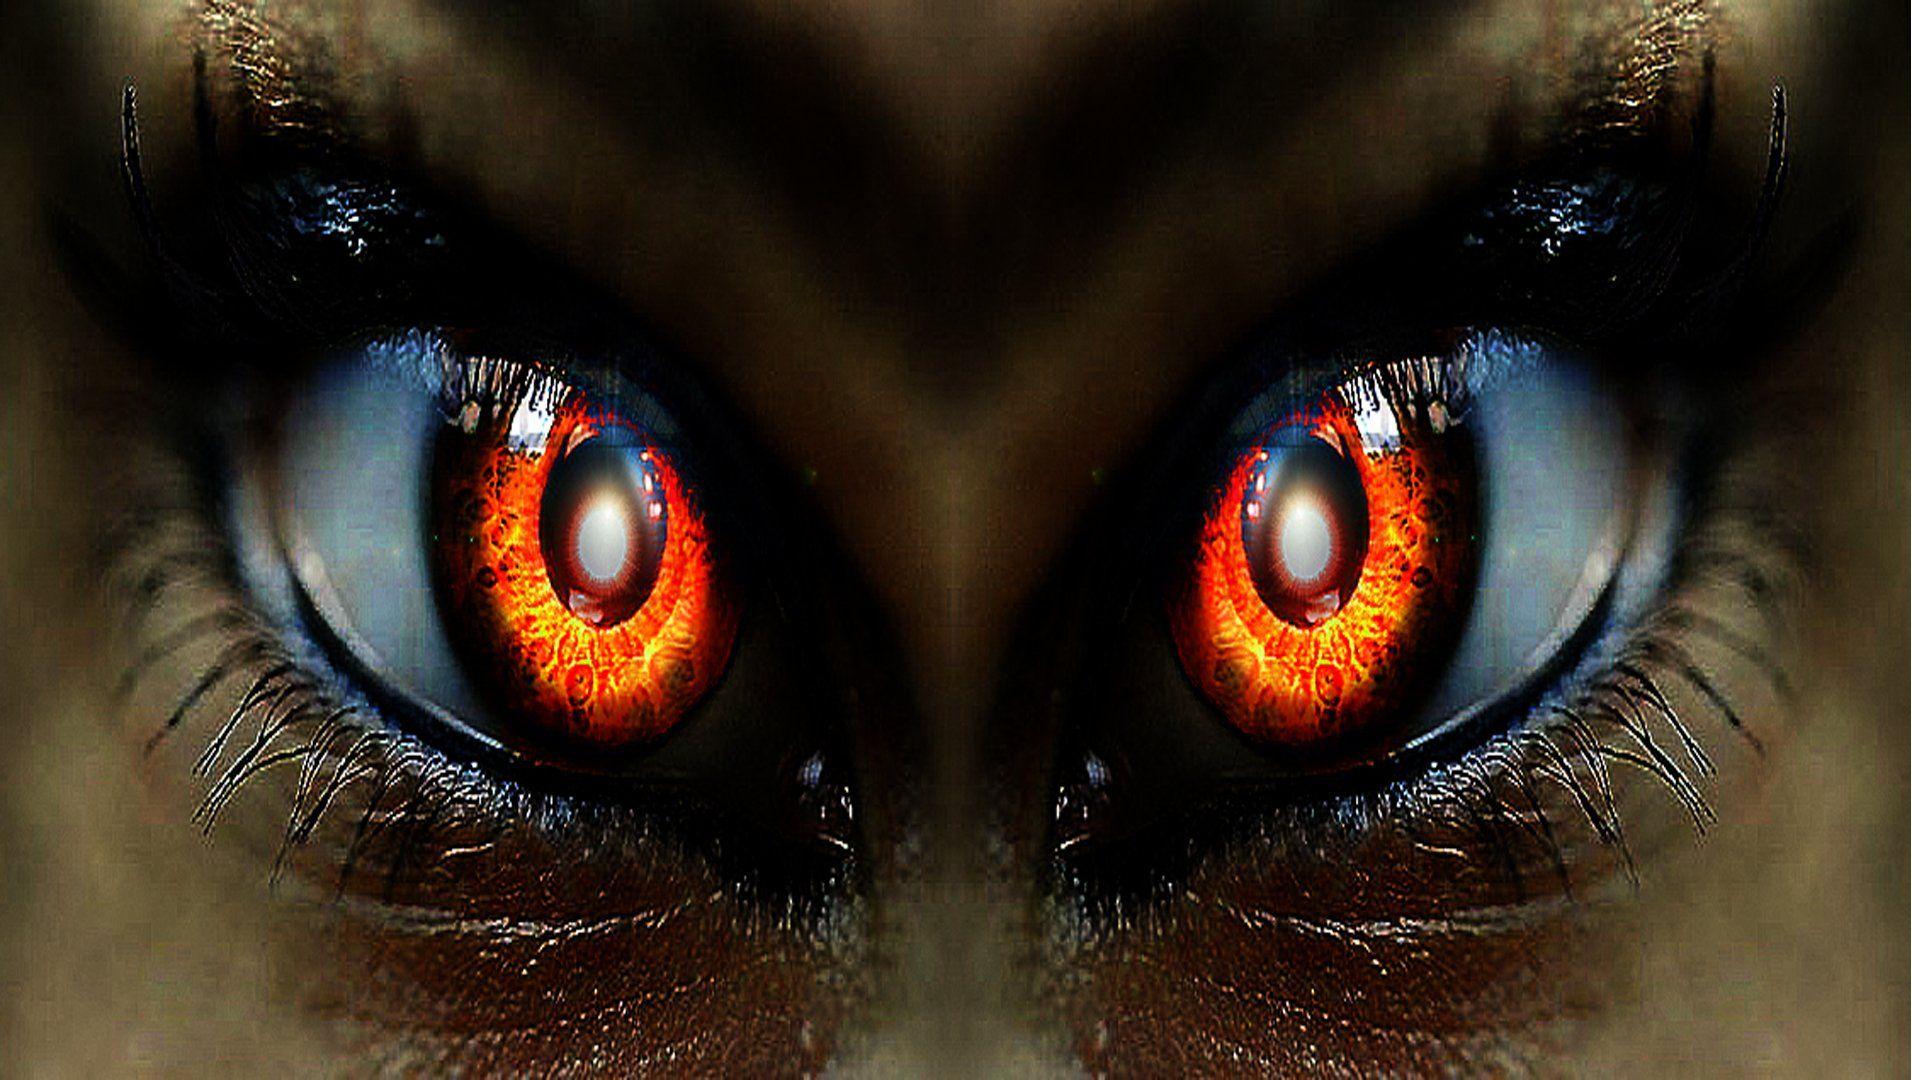 Power in my eyes Wallpaper and Background Imagex1080